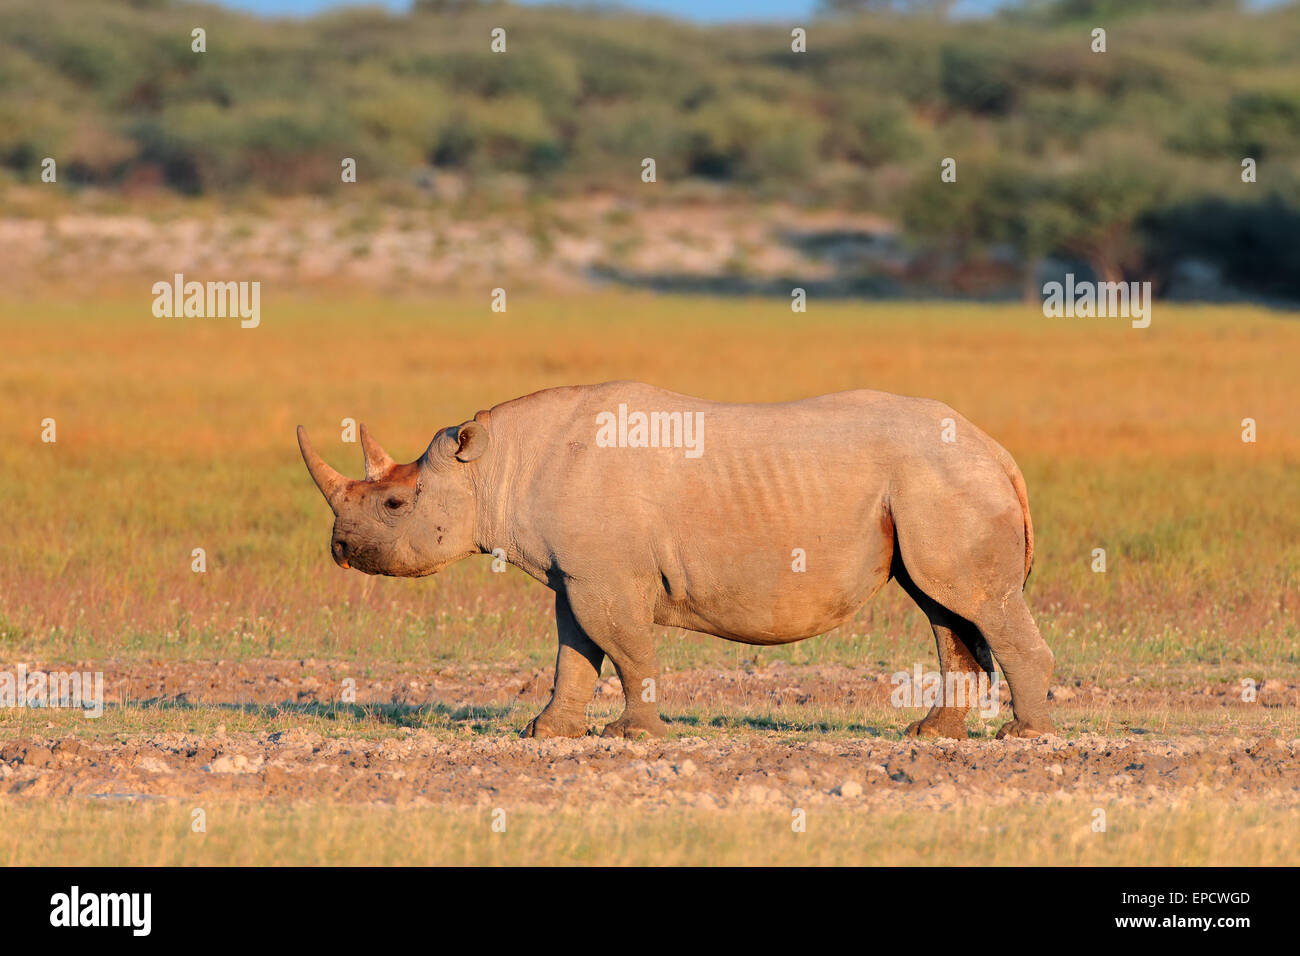 A black (hooked-lipped) rhinoceros (Diceros bicornis), South Africa Stock Photo